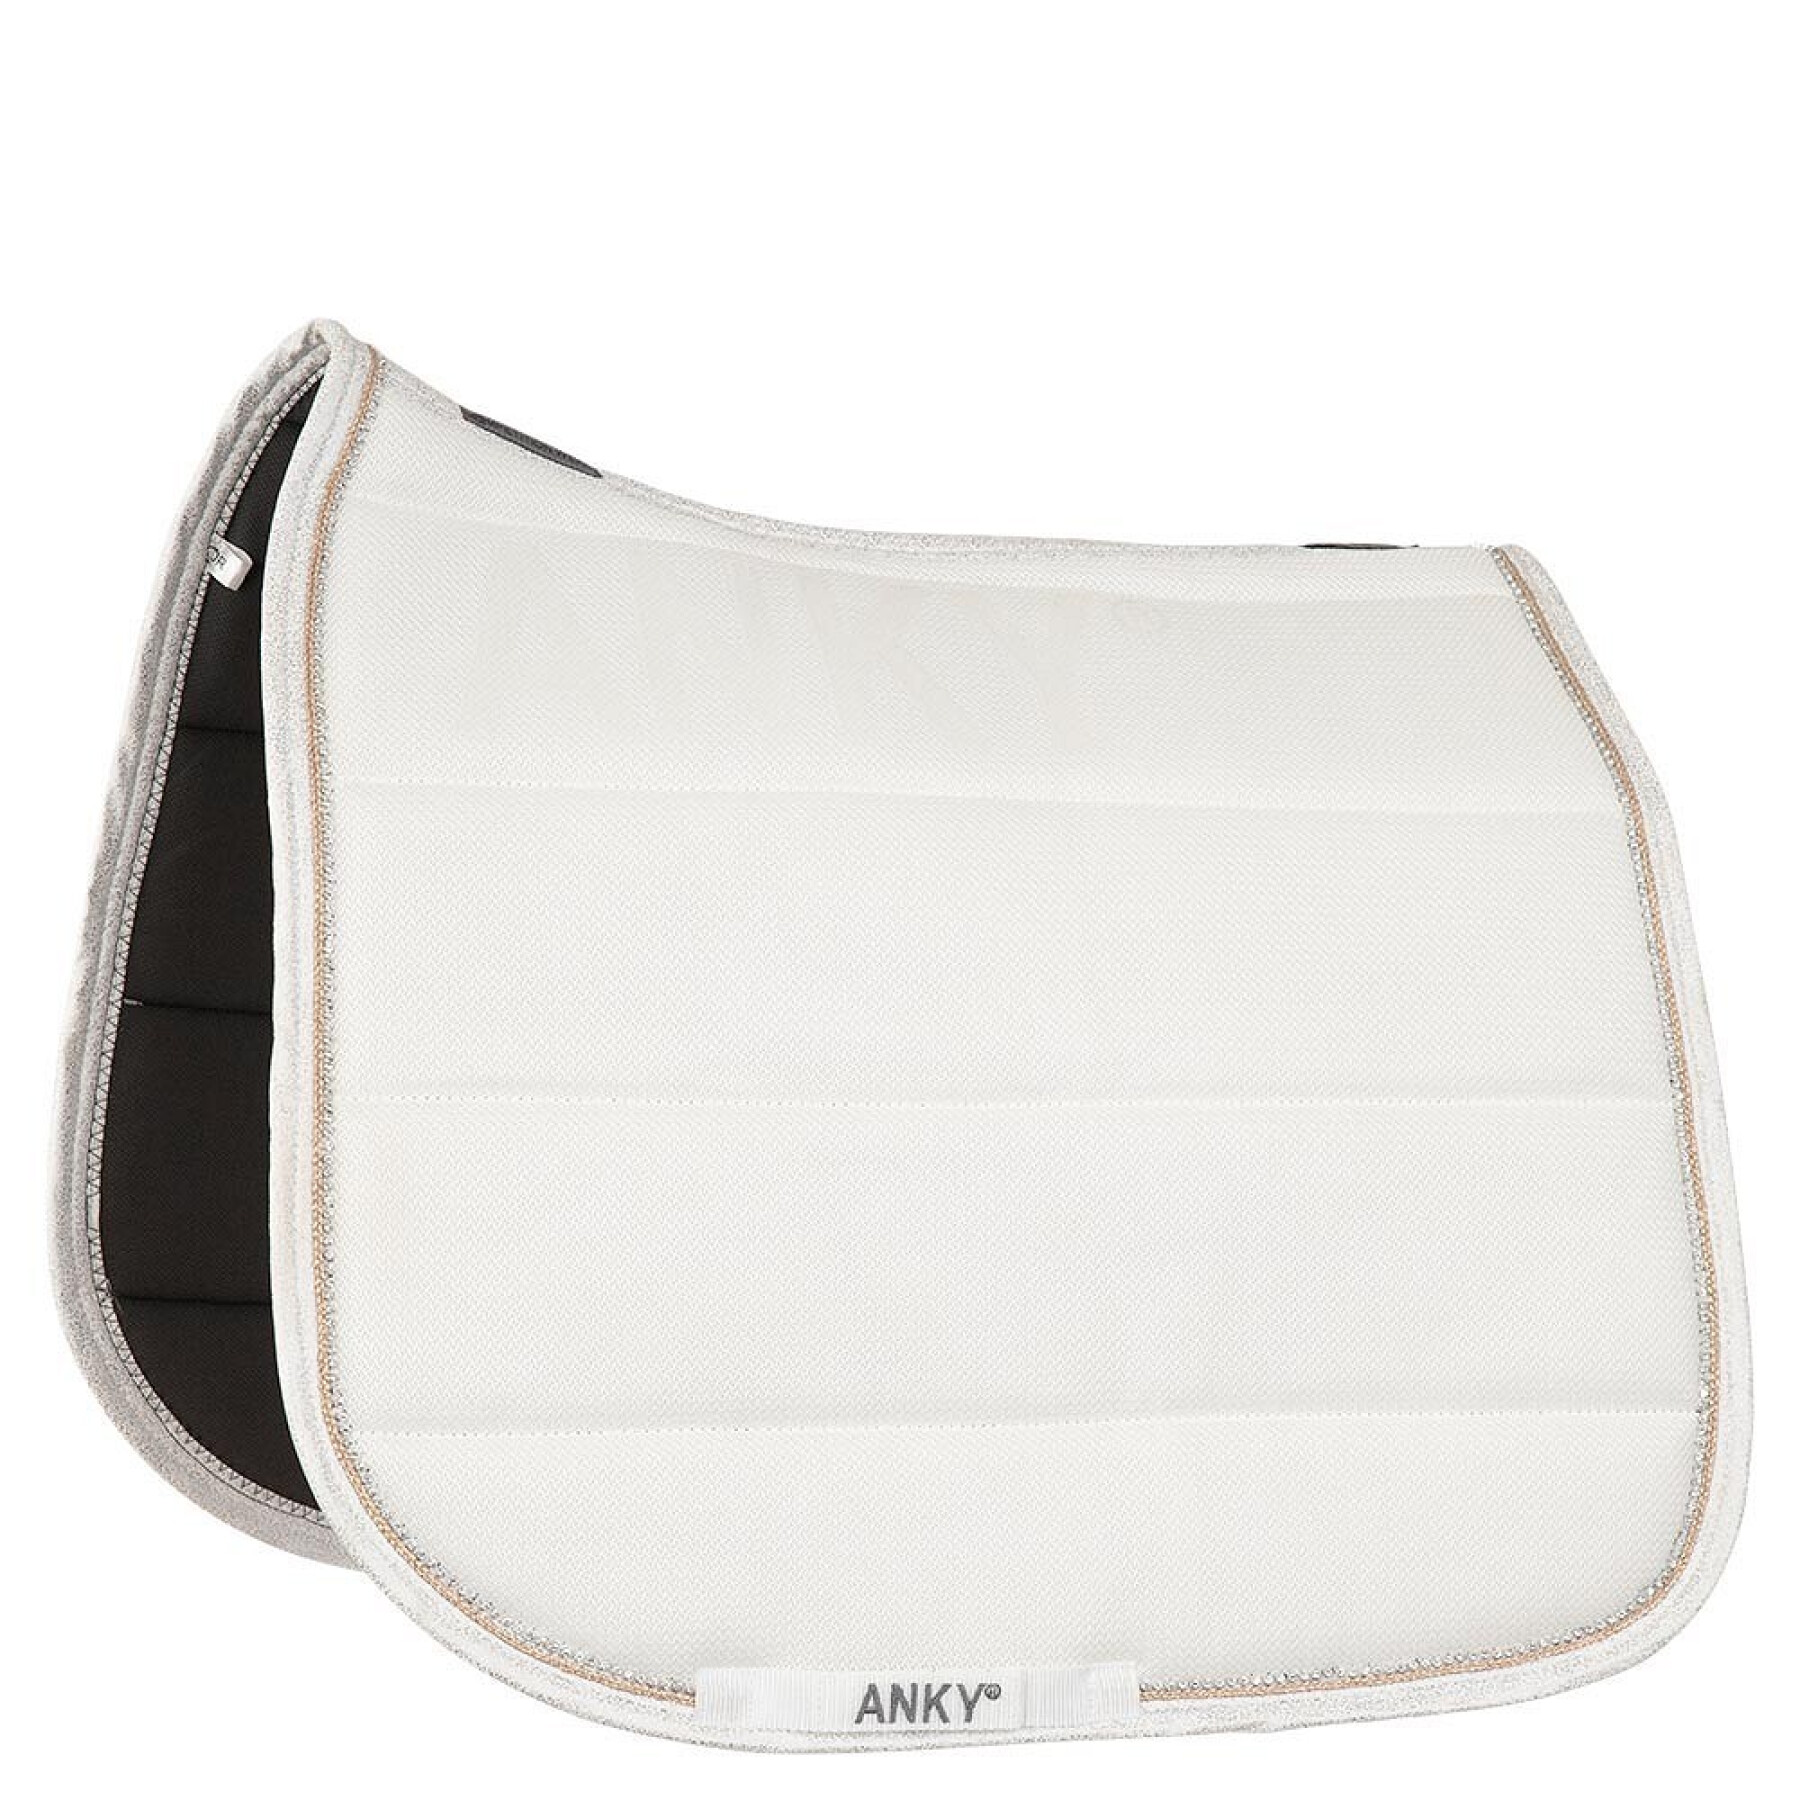 Dressage mat for horses ANKY Crystal Airstream